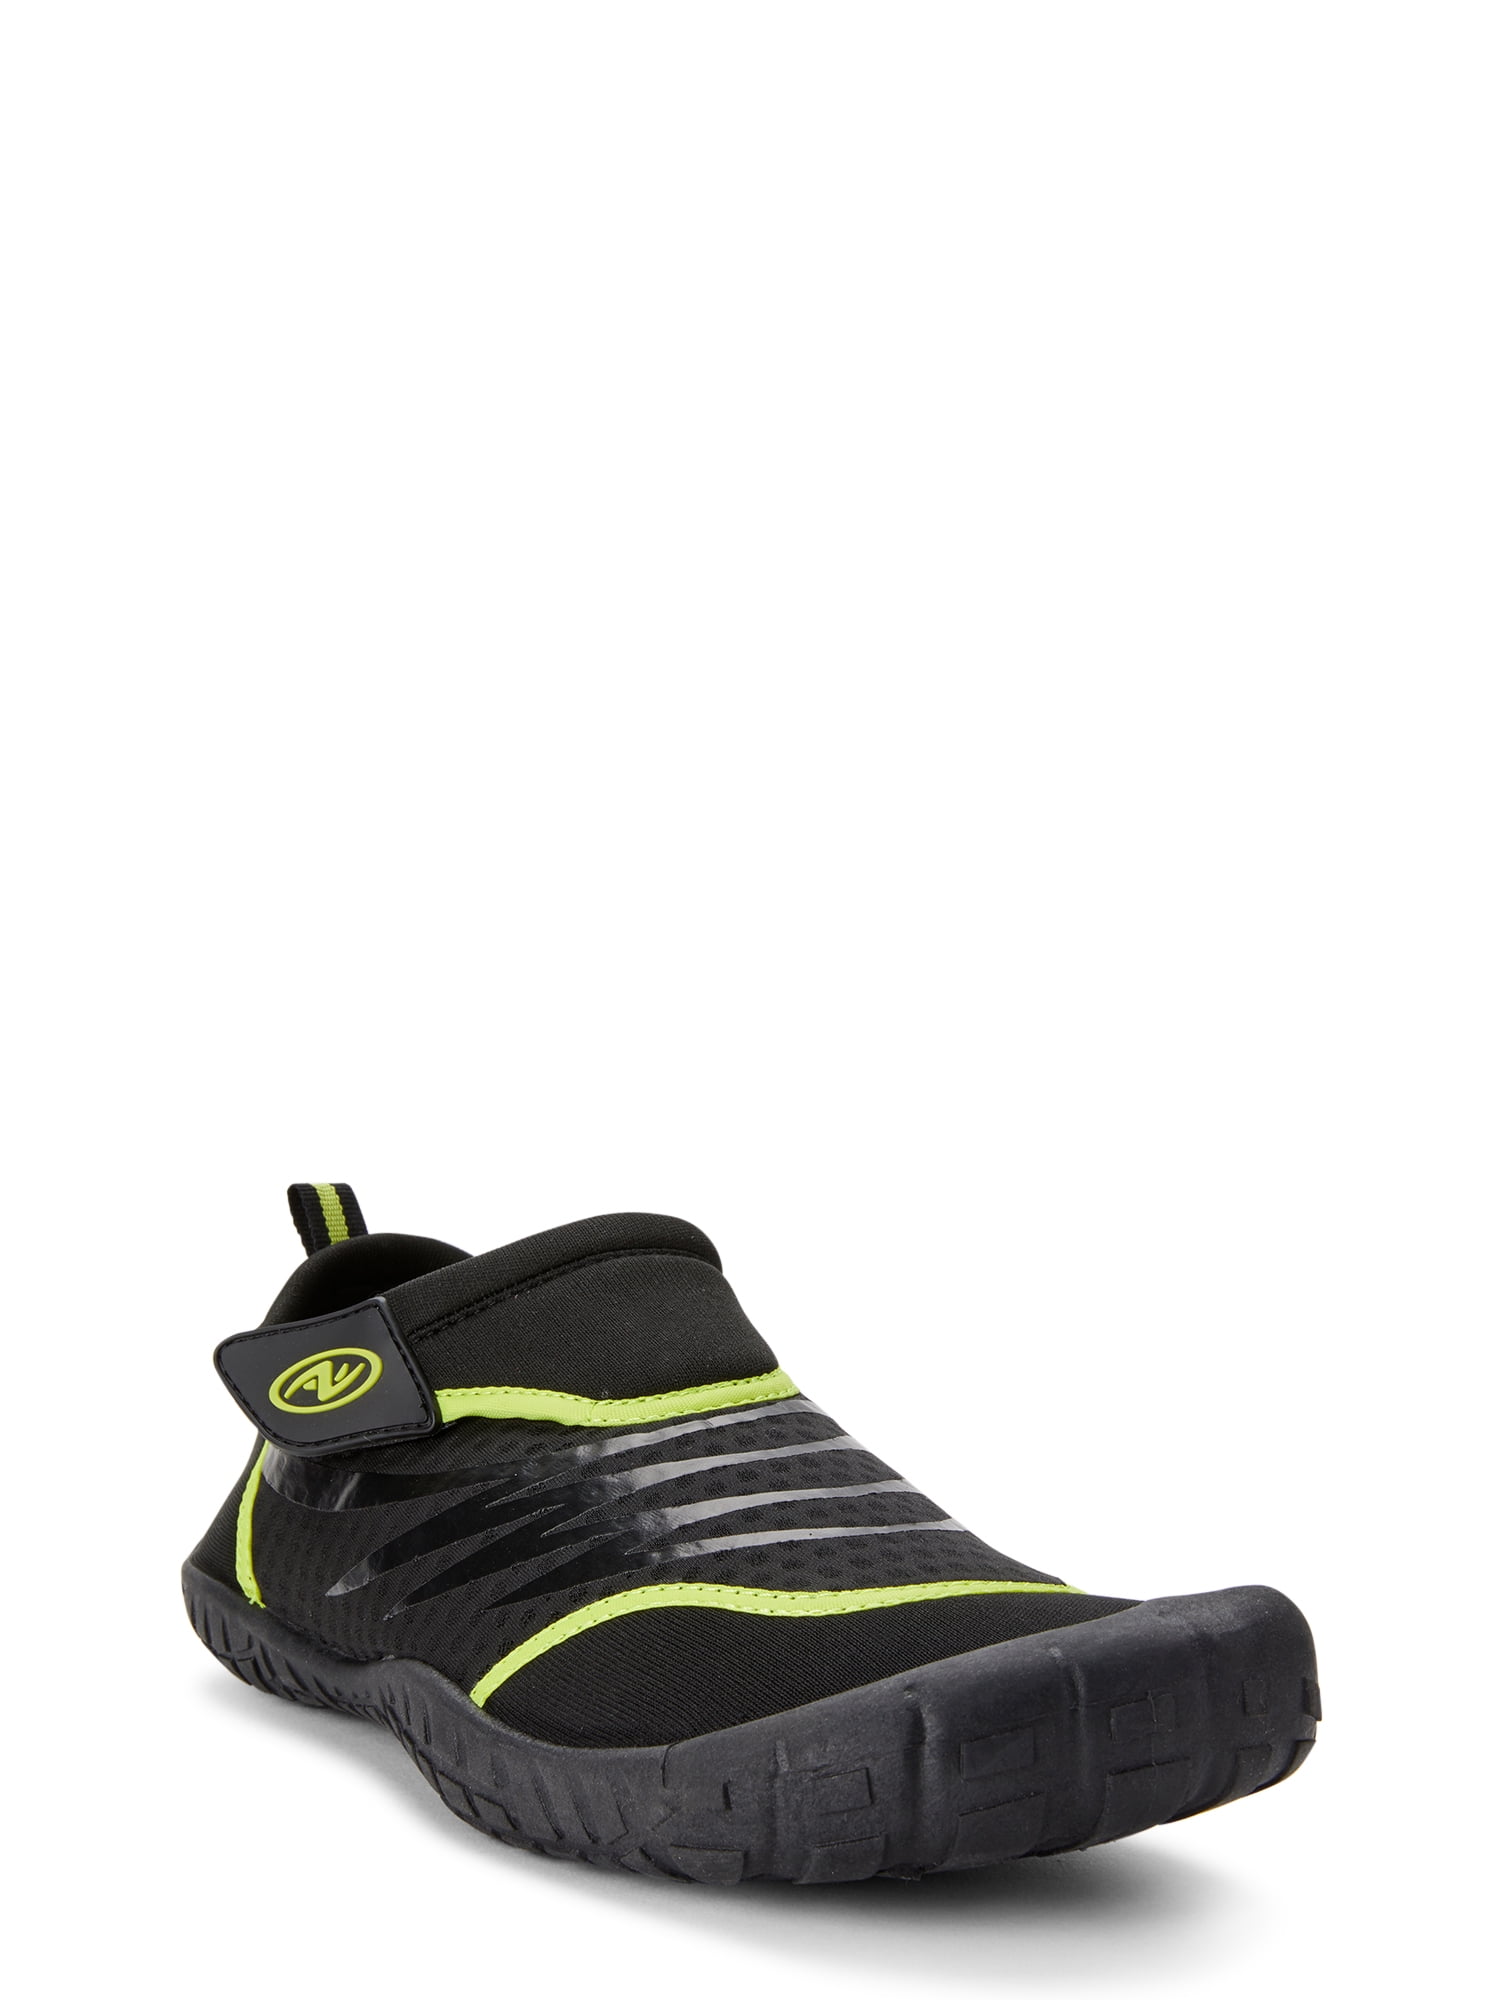 Athletic Works Men's Beach Shoes 